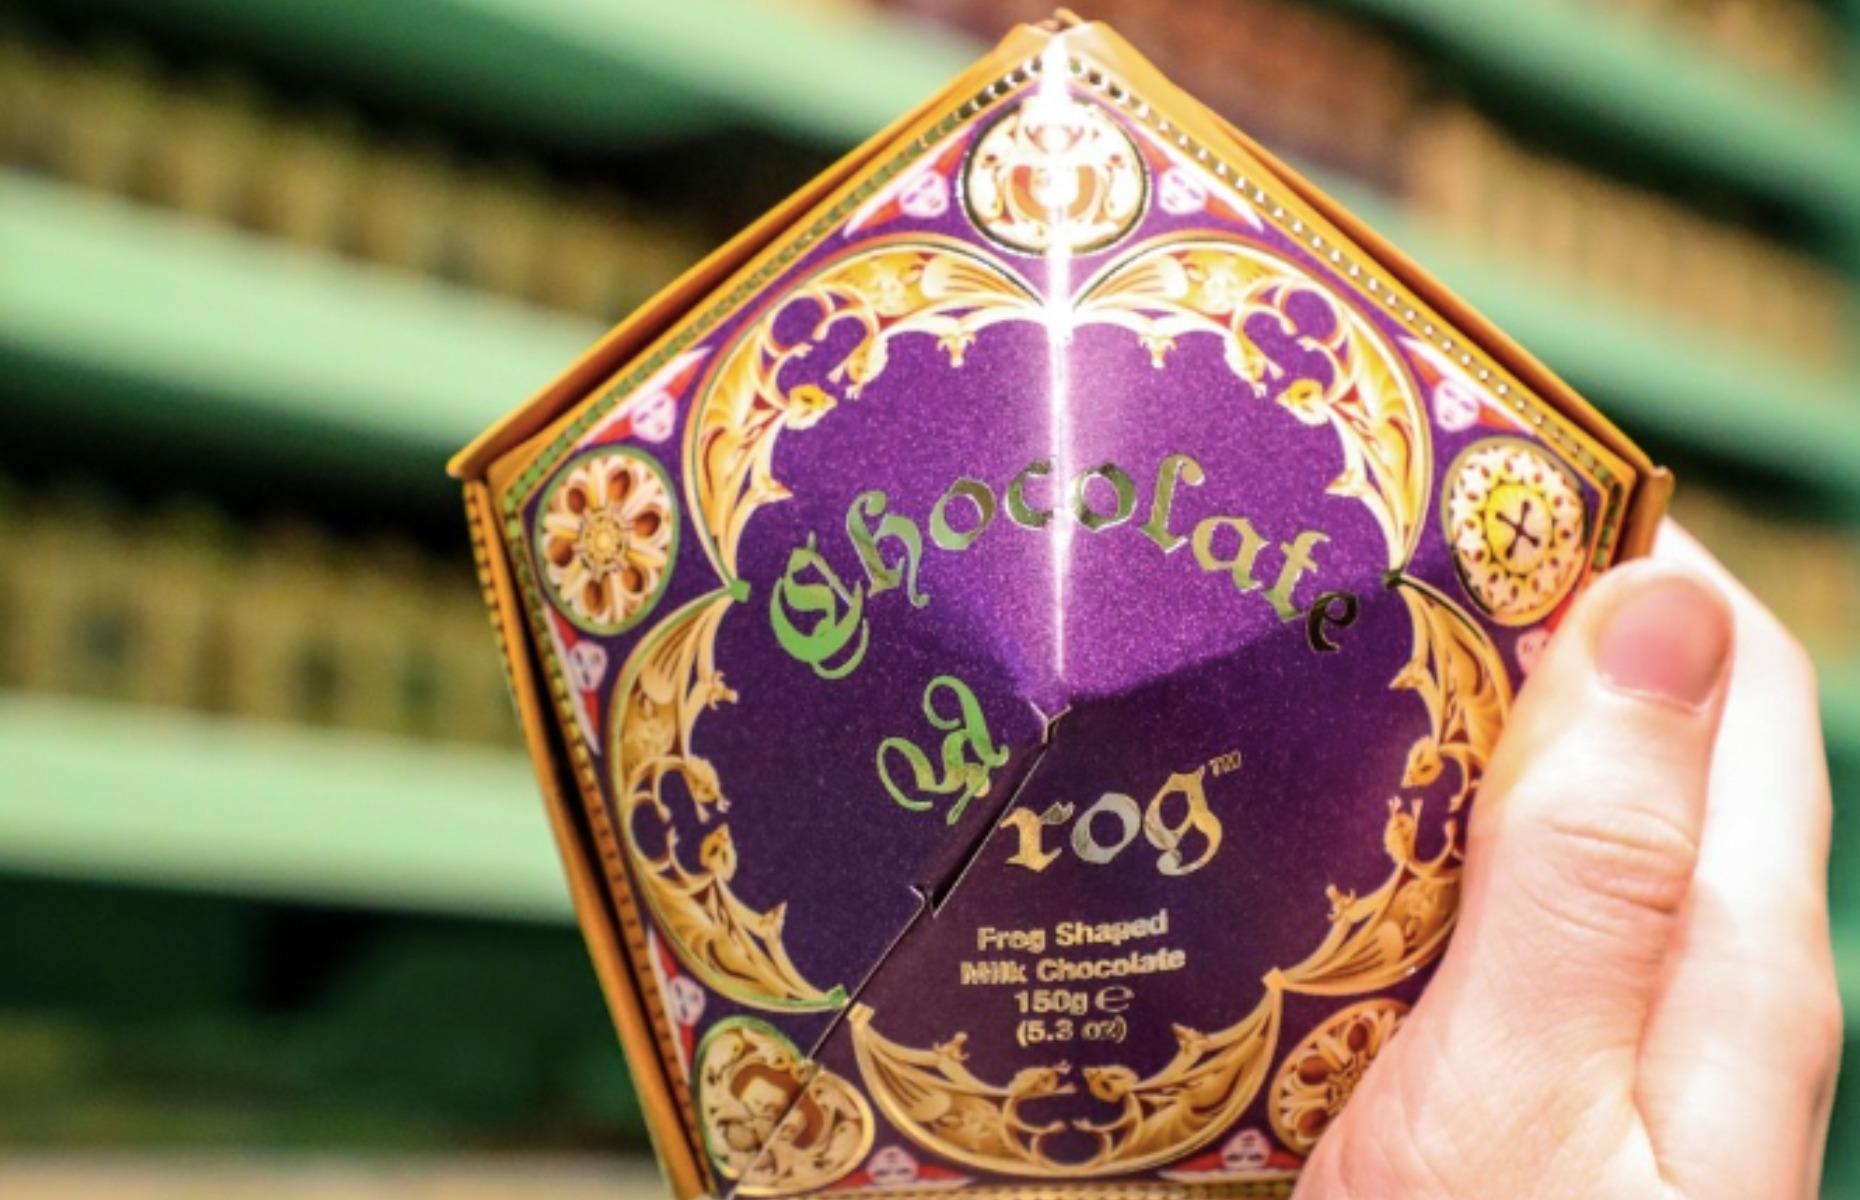 As all true Potterheads (Harry Potter super fans) know, there’s many a tasty treat on offer in the wizarding world. Is it any wonder then that a plethora of spellbinding snacks inspired by the Potterverse have made their way into real life? Here’s our round-up of the best Harry Potter foods to eat around the globe, from the classic Butterbeer concoction to a potent Polyjuice Potion and an edible Golden Snitch.